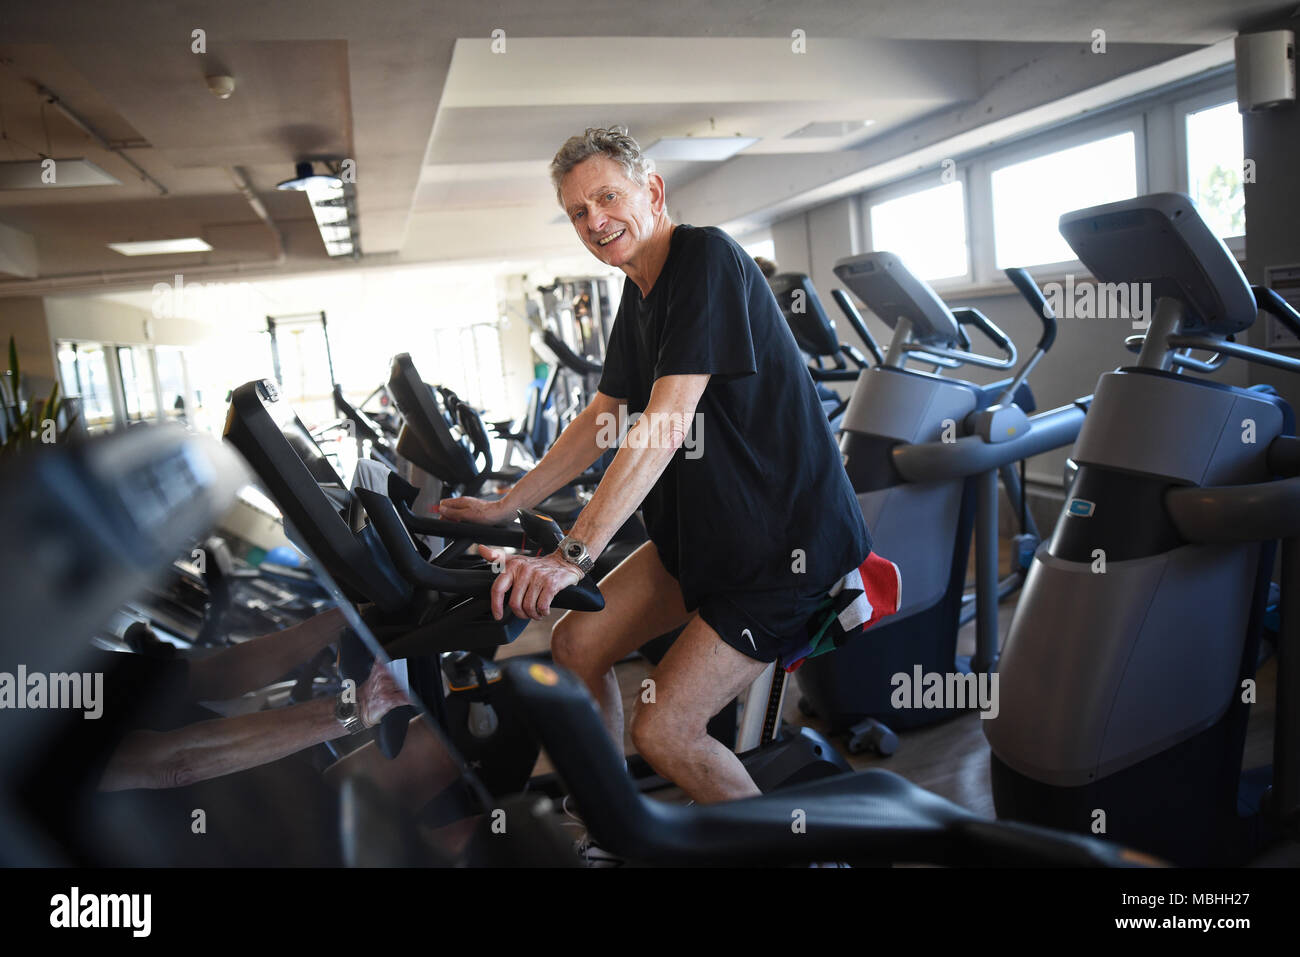 06 April 2018, Germany, Bergisch Gladbach: Clemens Berghaus, 73 years old, exercises on a bicycle ergometer at a gym. Photo: Henning Kaiser/dpa Stock Photo